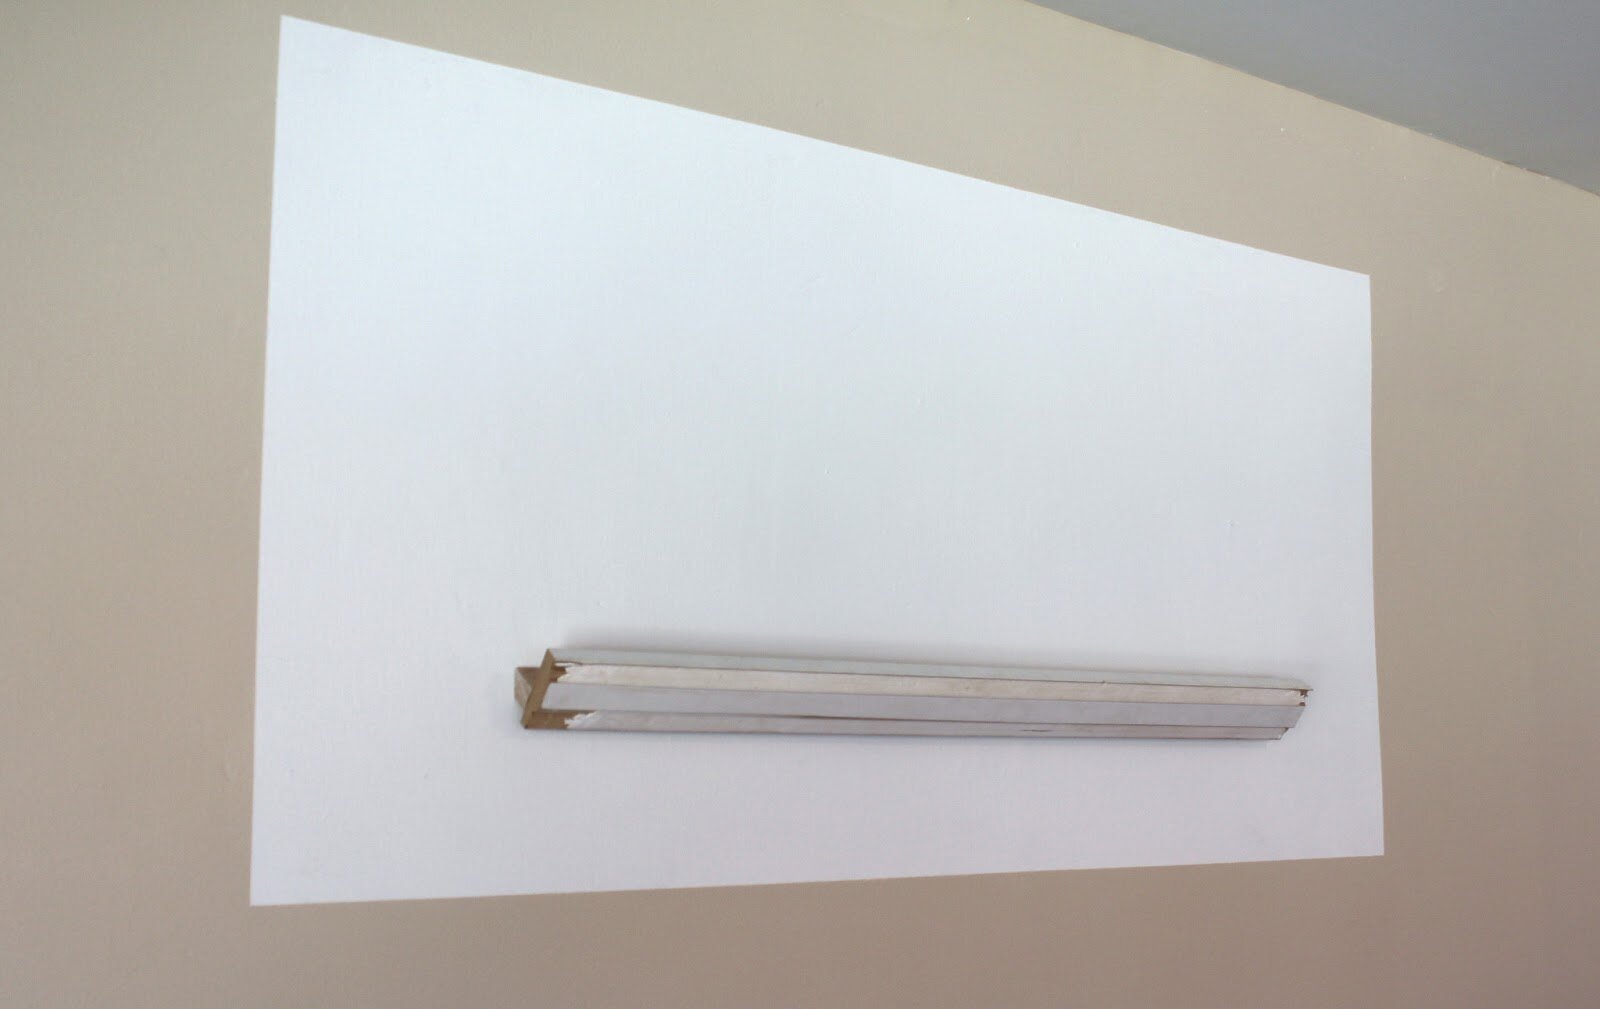  Ashley Morgan -&nbsp; White Out ( routed primed MDF filled with spackle) 2012 